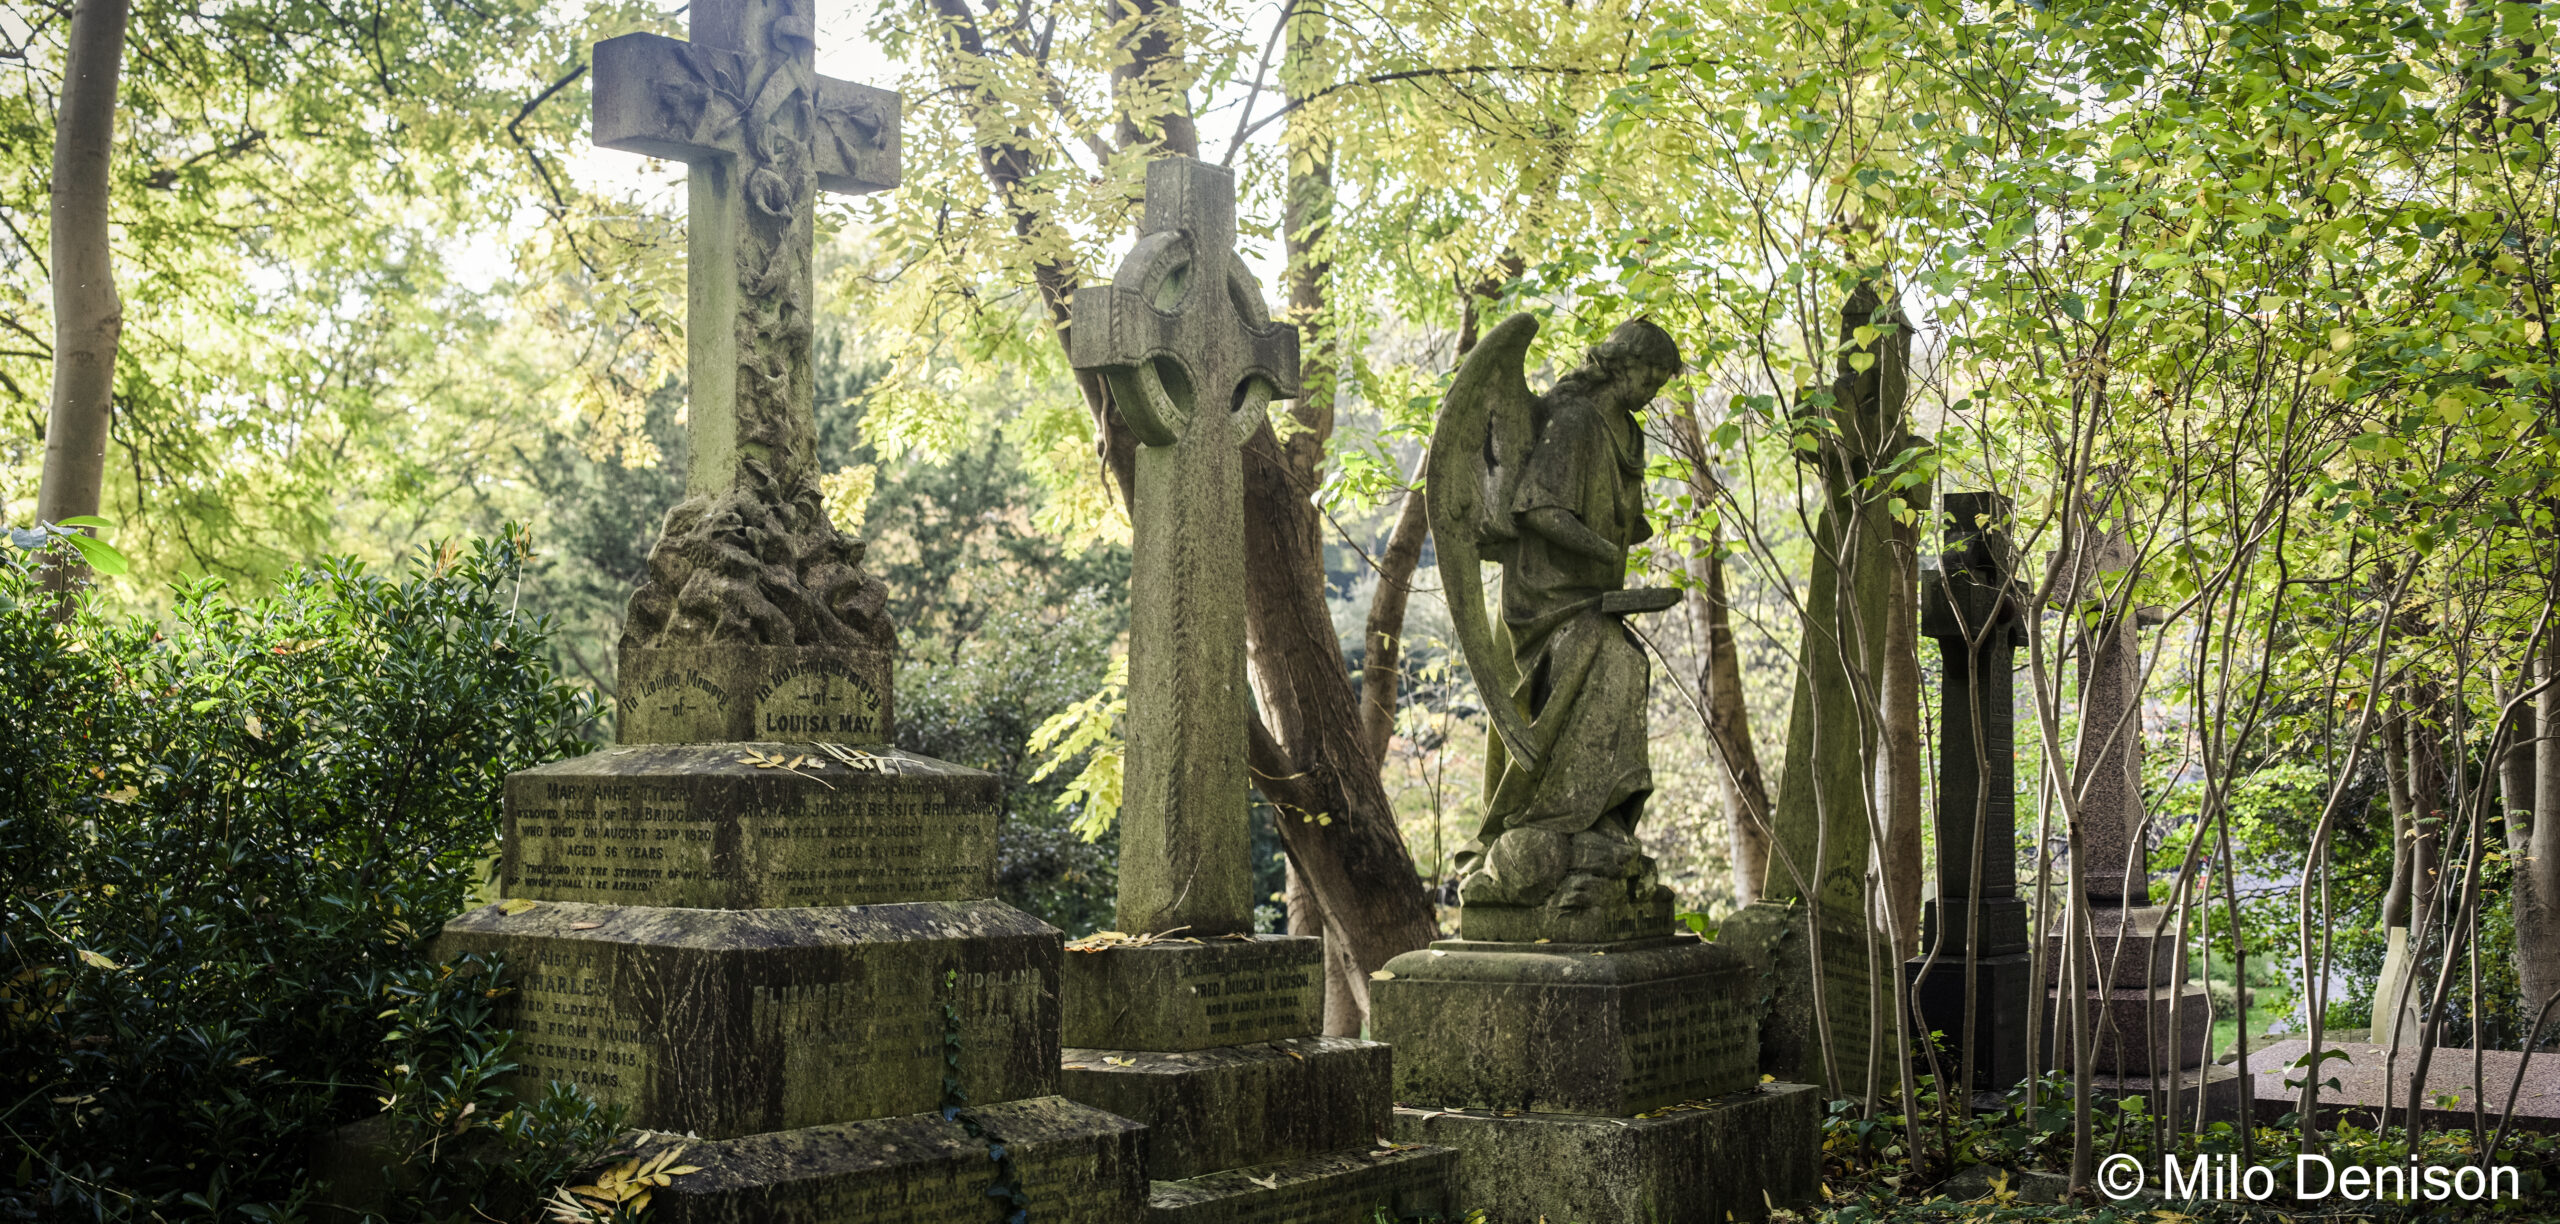 Highgate Cemetery with Karl Marx and Douglas Adams